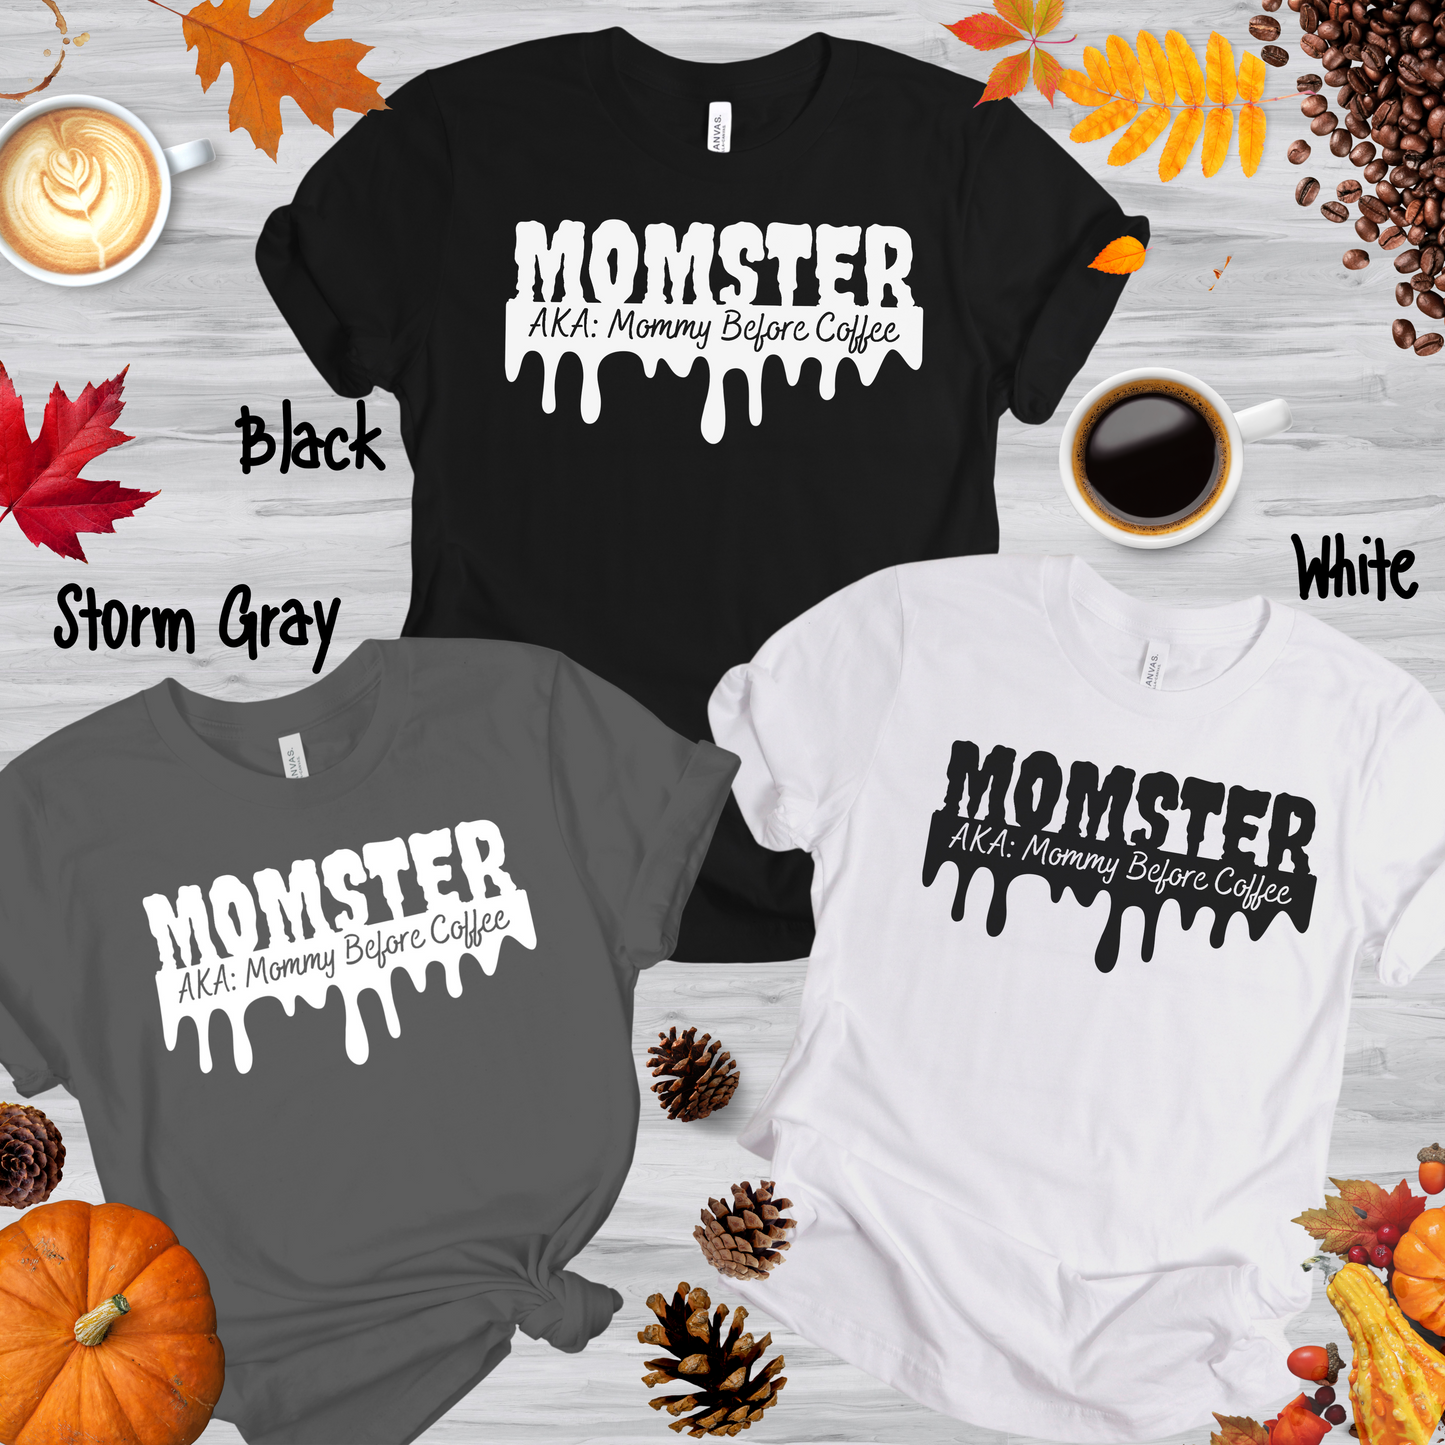 MOM-STER AKA: Mommy Before Coffee |  Funny Shirt for Mom